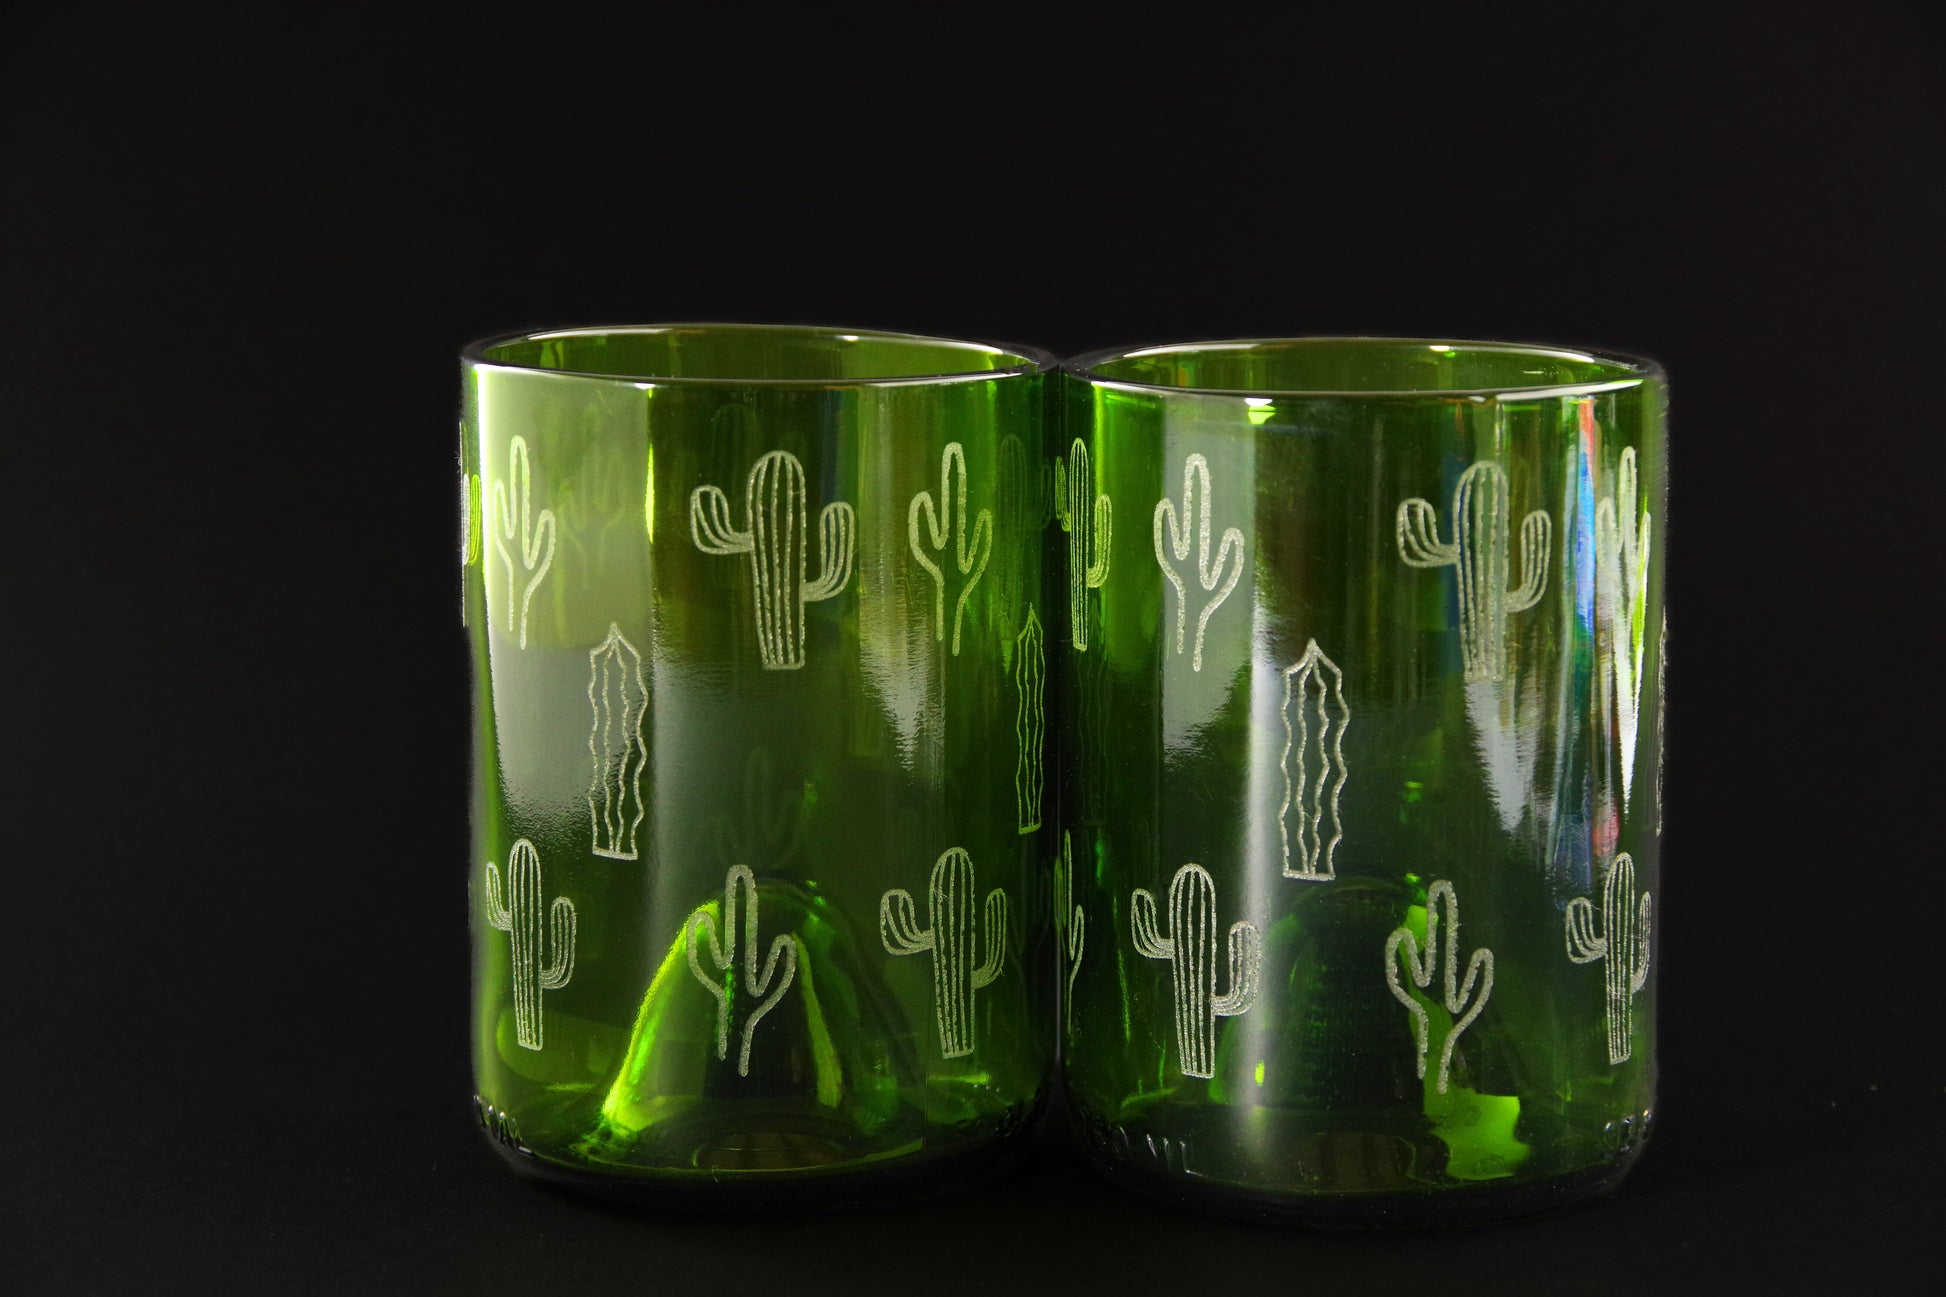 Glass Cup Set Cactus Glasses Juice Mugs Green Stained Glass Juice